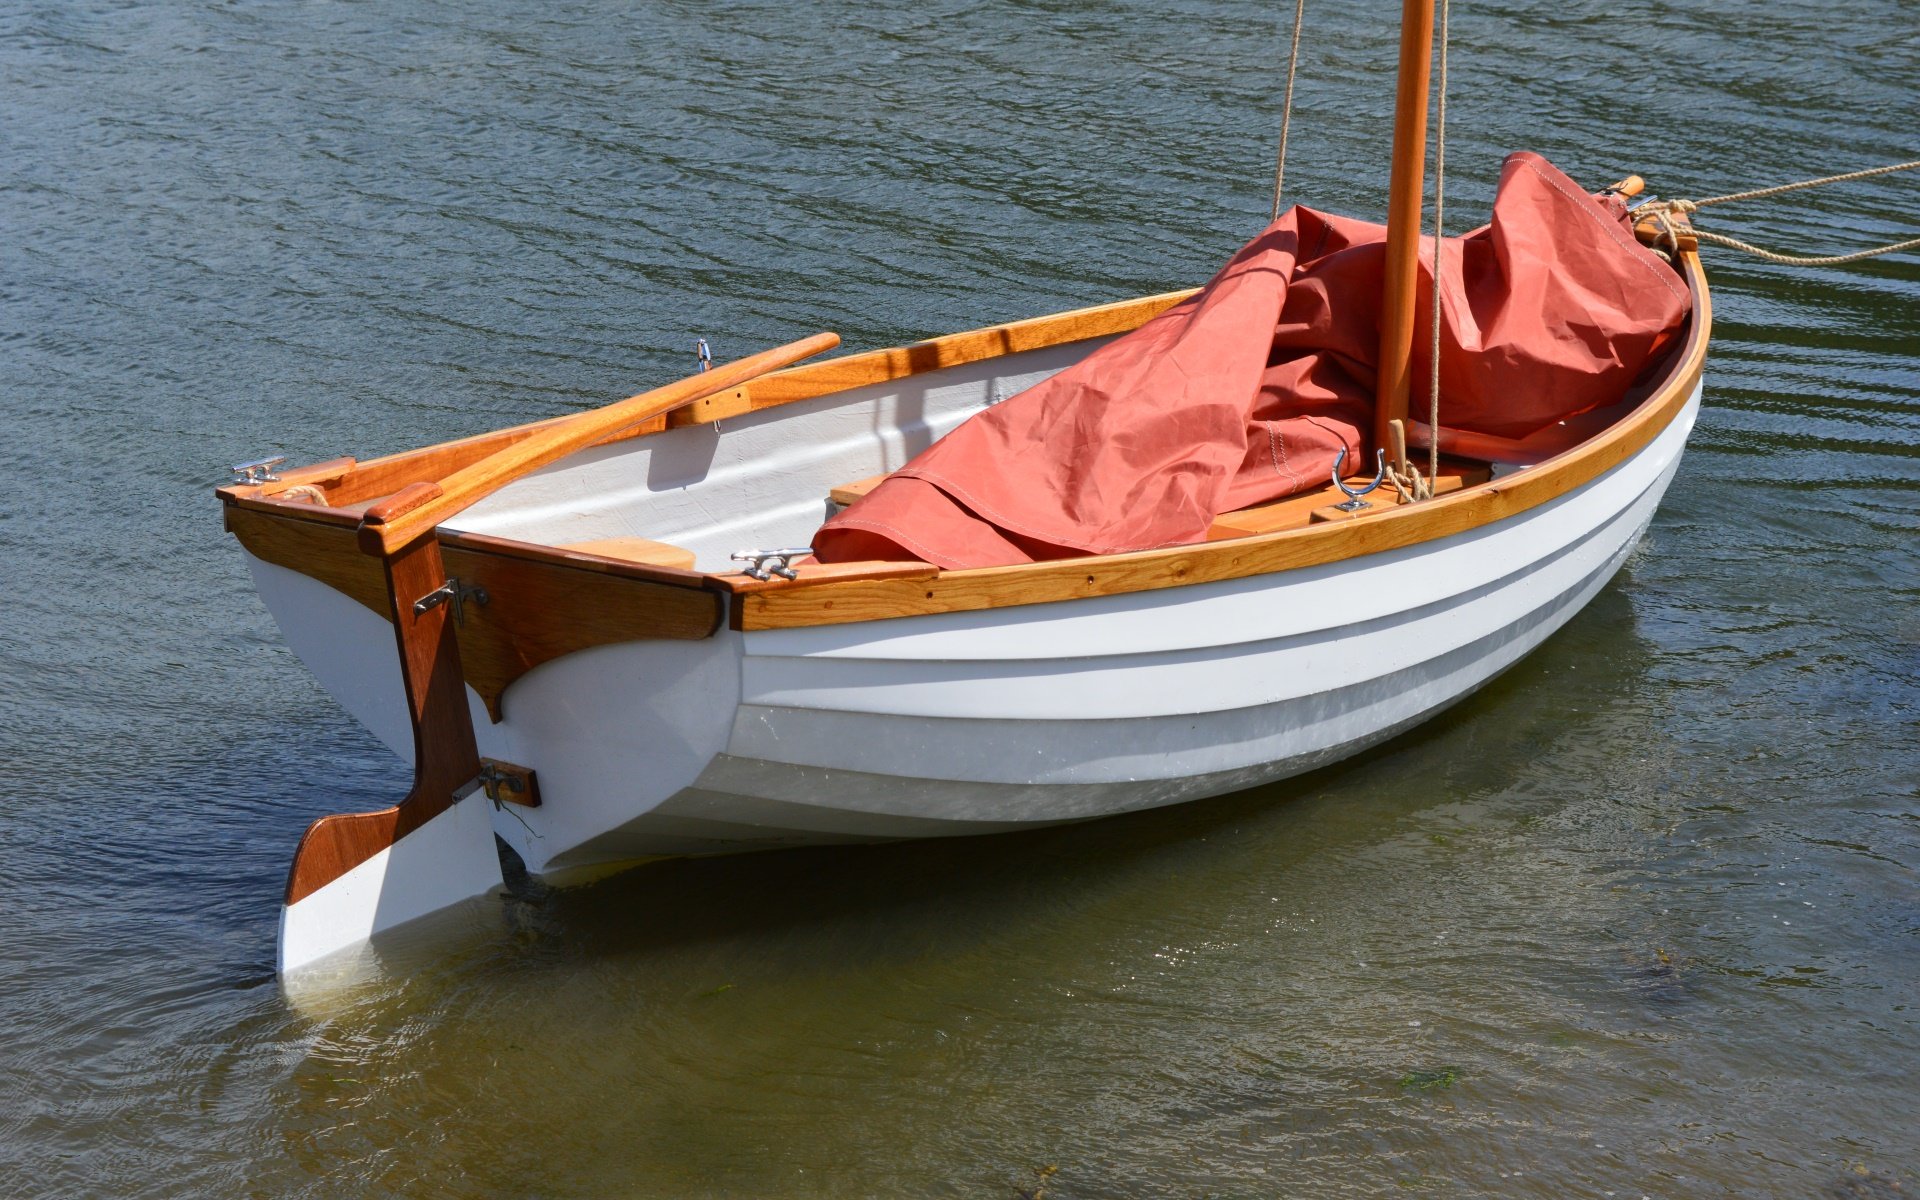 9ft Wooden Dinghy from Skur Boats